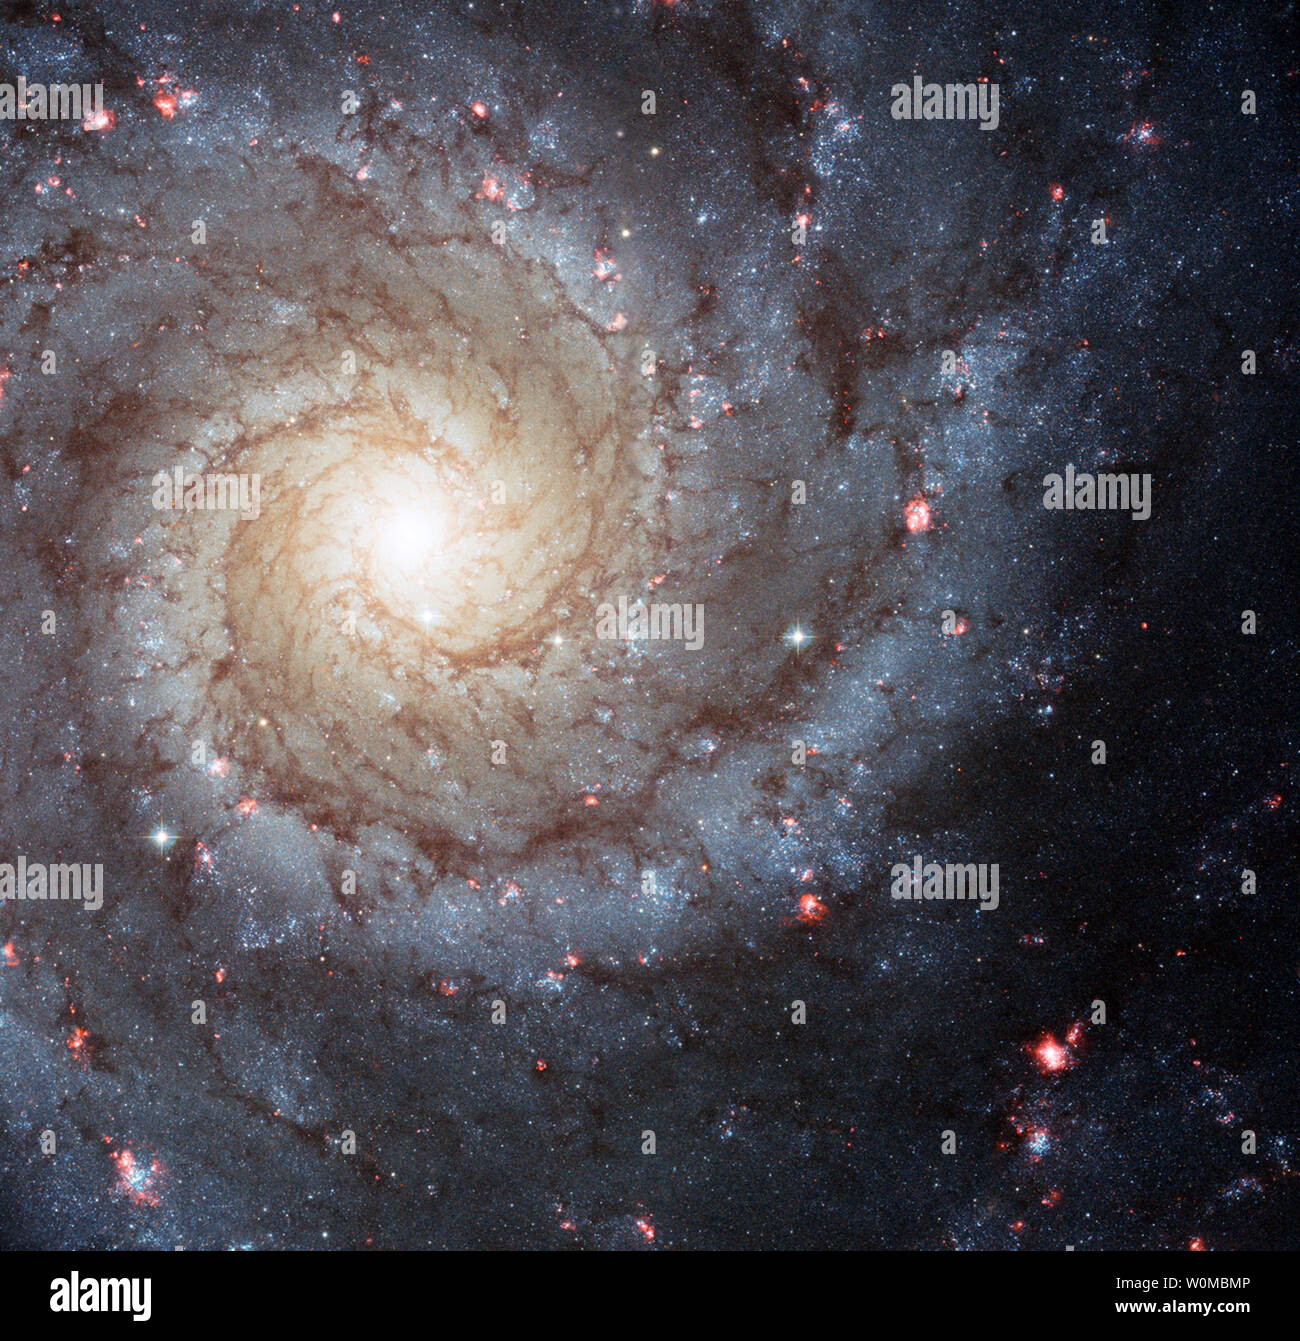 Spiral Galaxy M74 is seen in this Hubble Space Telescope composite image. Messier 74, also called NGC 628, is a stunning example of a 'grand-design' spiral galaxy that is viewed by Earth observers nearly face-on. Its perfectly symmetrical spiral arms emanate from the central nucleus and are dotted with clusters of young blue stars and glowing pink regions of ionized hydrogen (hydrogen atoms that have lost their electrons). M74 is located roughly 32 million light-years away in the direction of the constellation Pisces, the Fish.    (UPI Photo/NASA/ESA/HST) Stock Photo